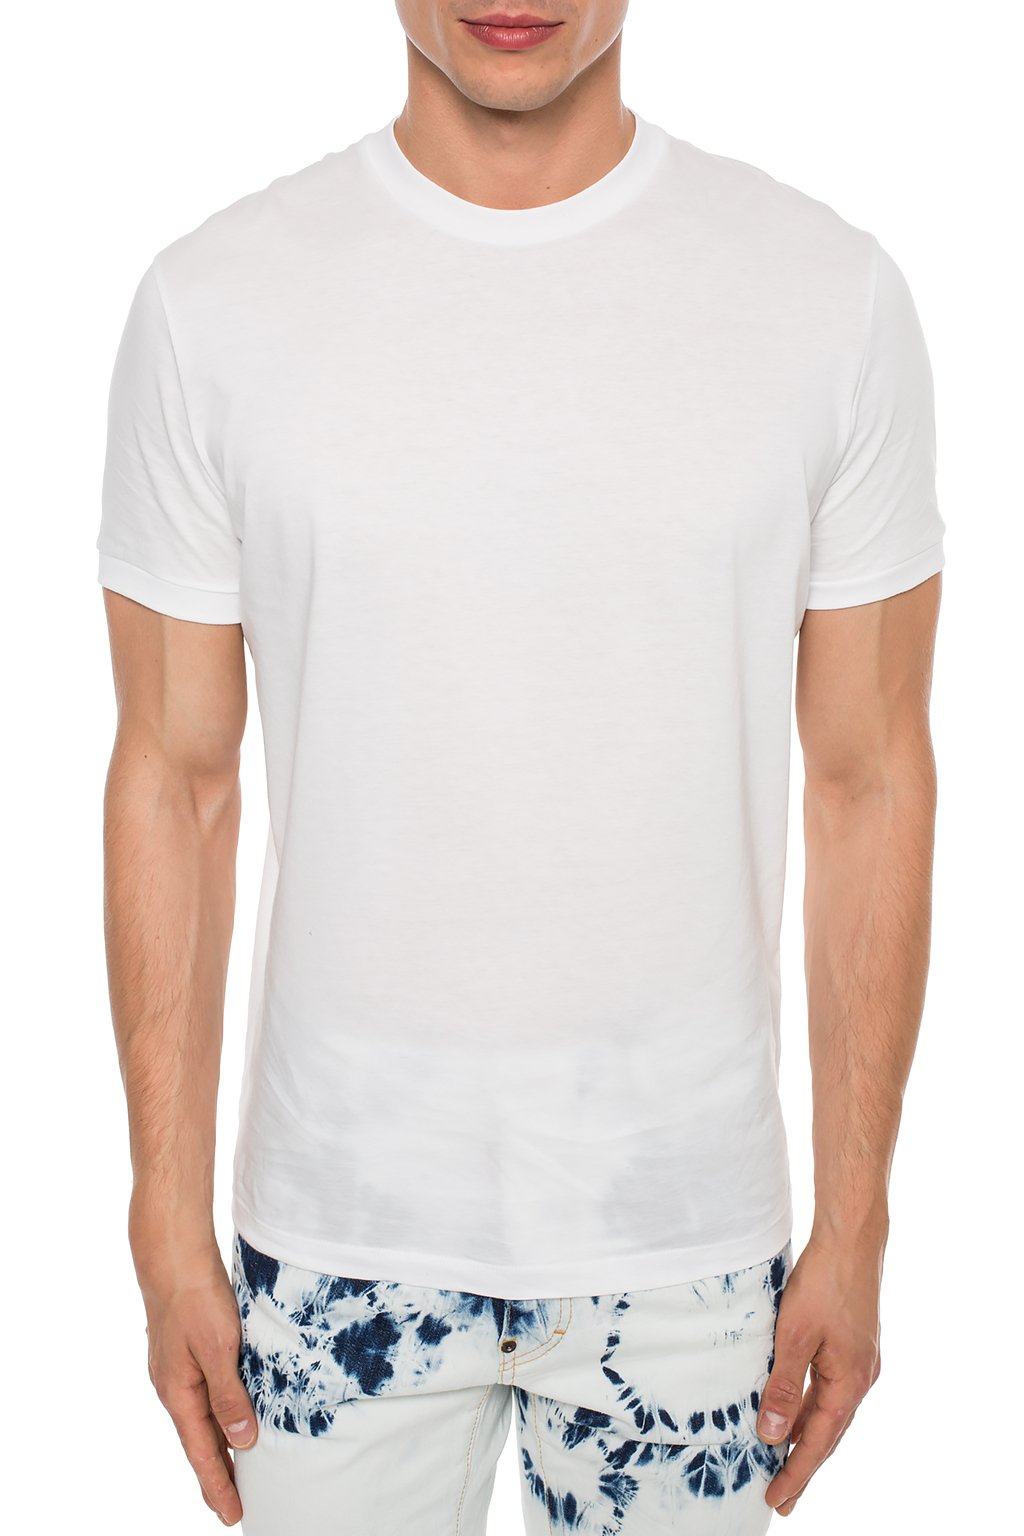 dsquared2 round neck t-shirt grey